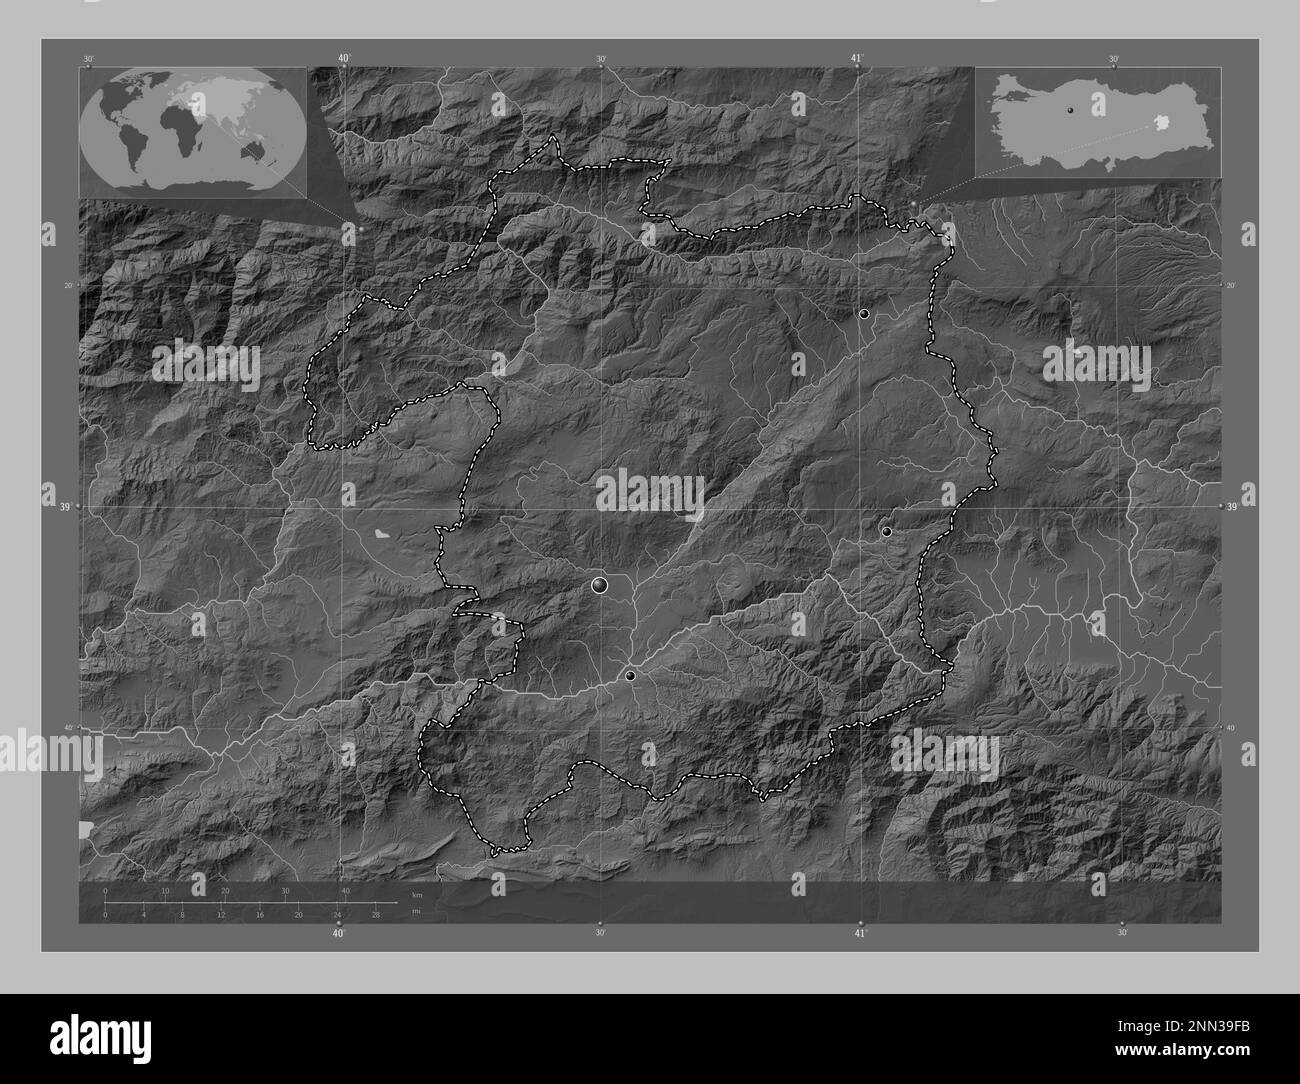 Bingol, province of Turkiye. Grayscale elevation map with lakes and rivers. Locations of major cities of the region. Corner auxiliary location maps Stock Photo